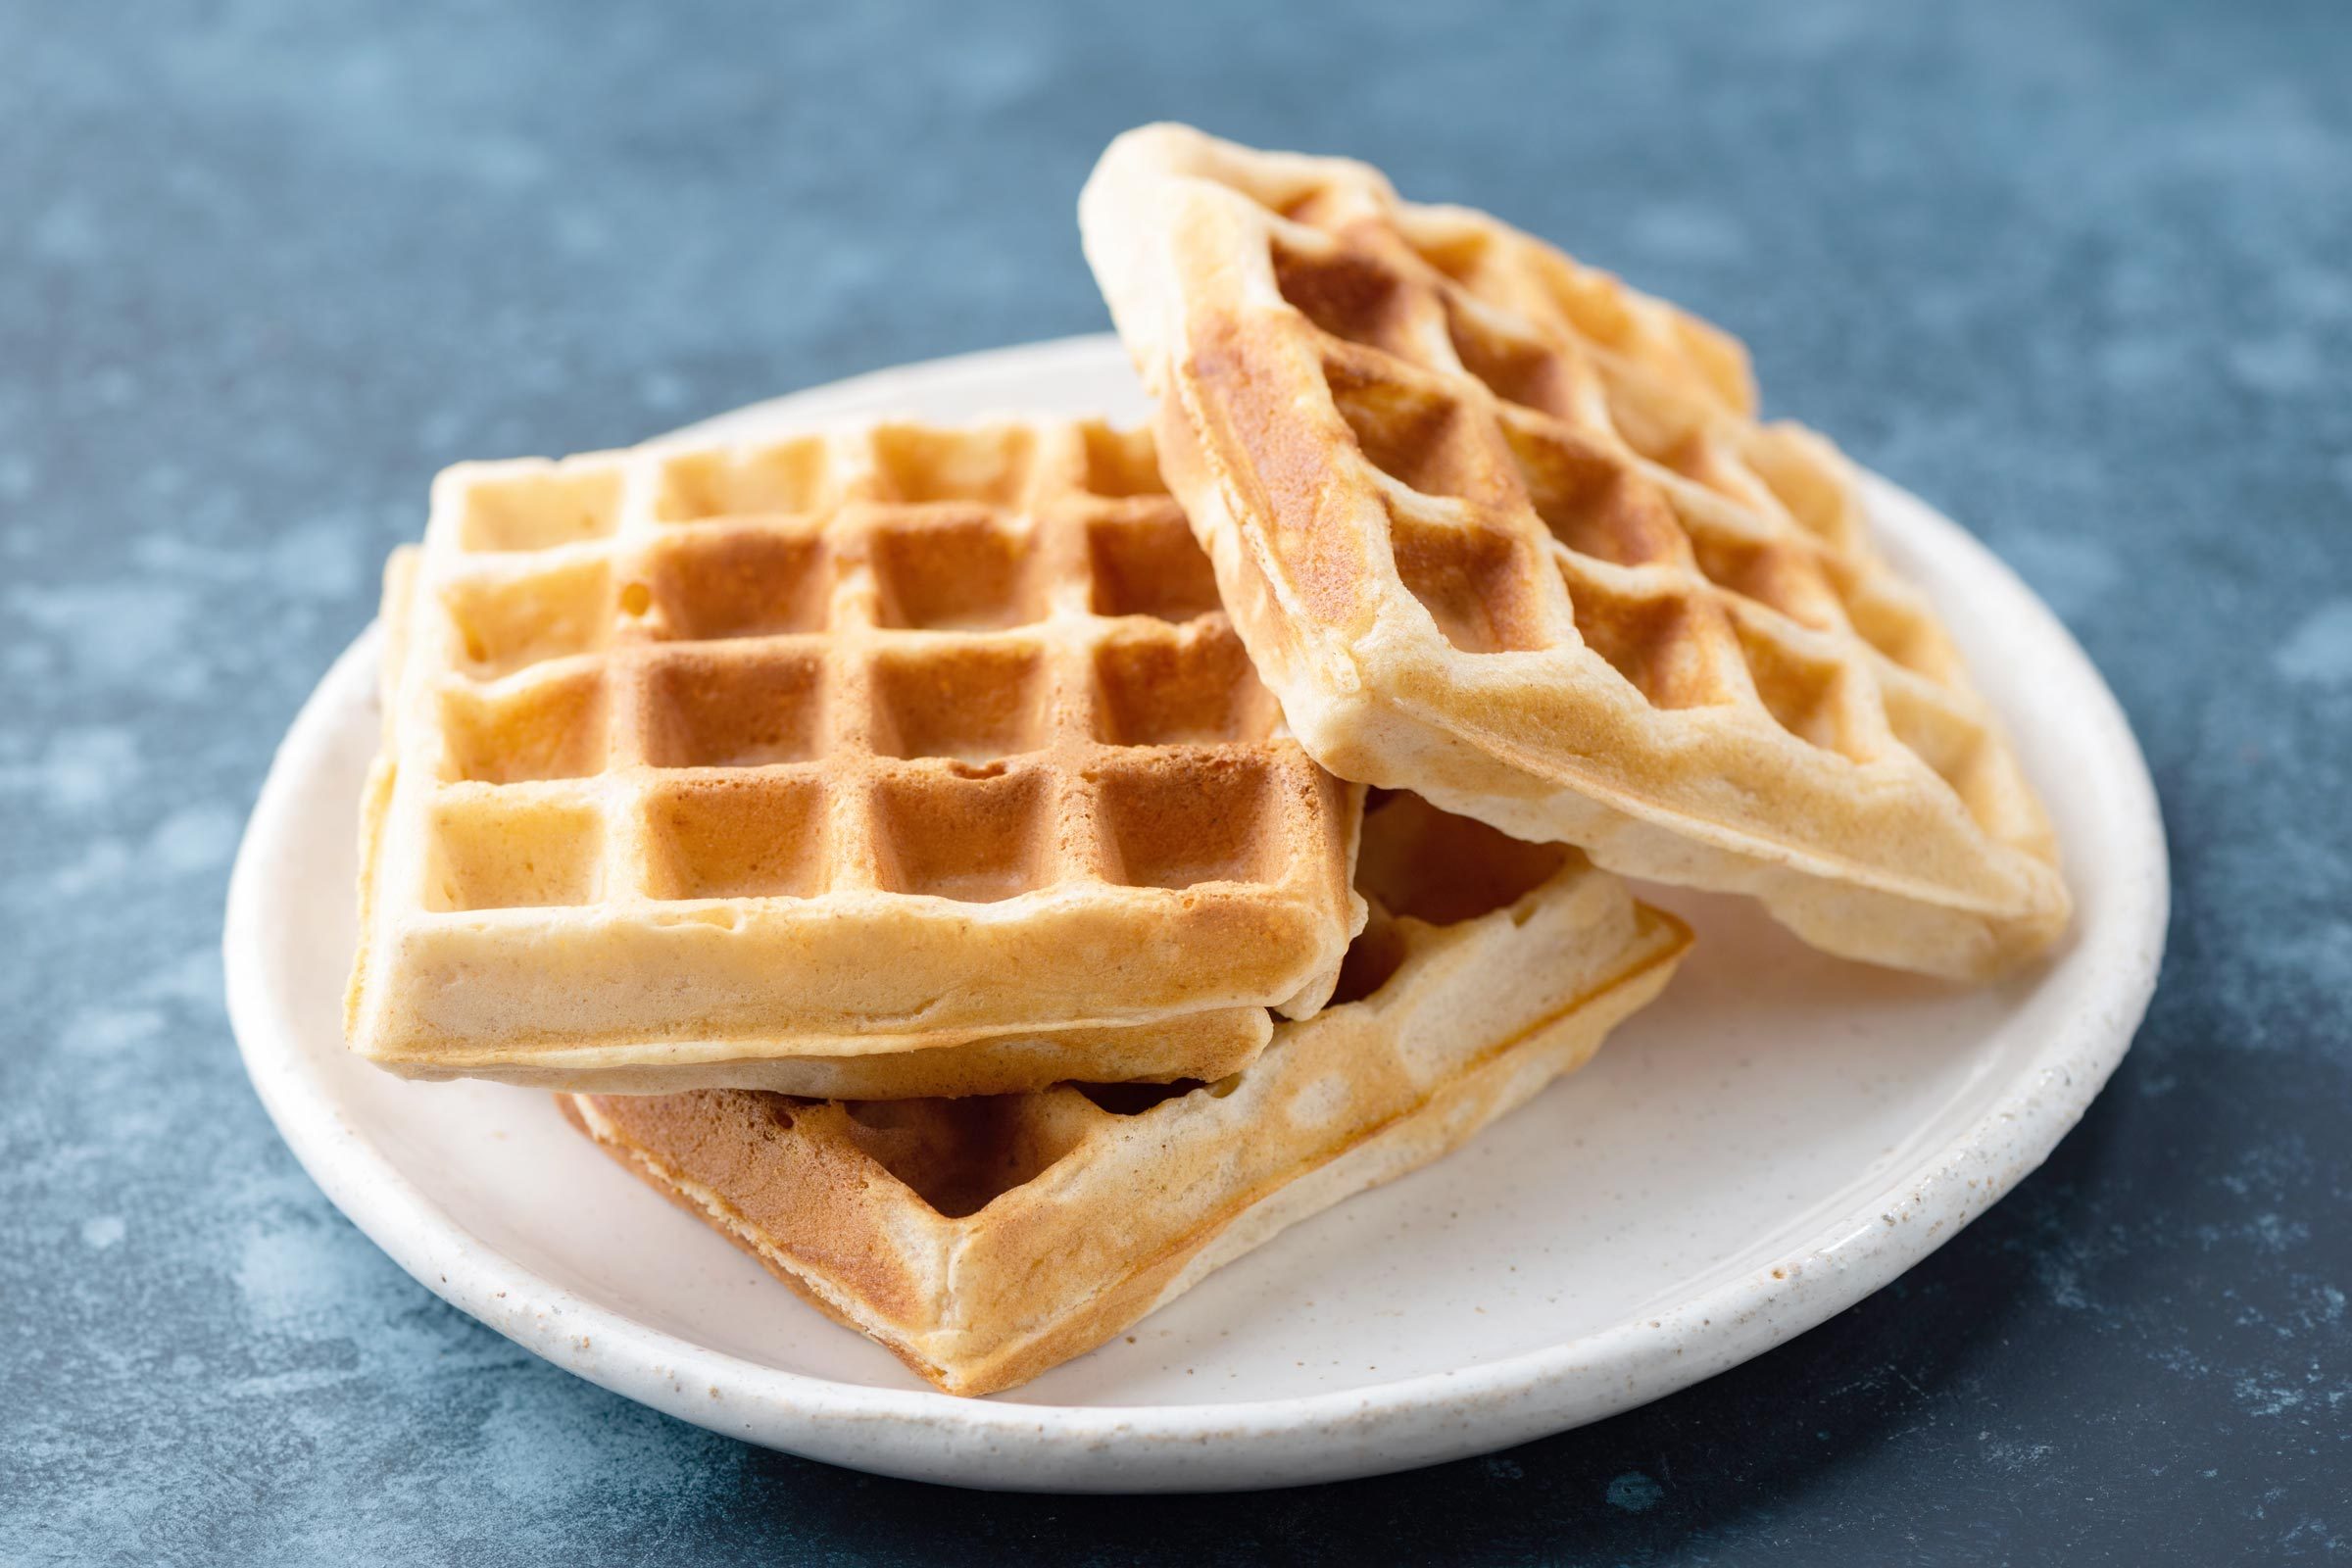 frozen waffles on a plate recalled